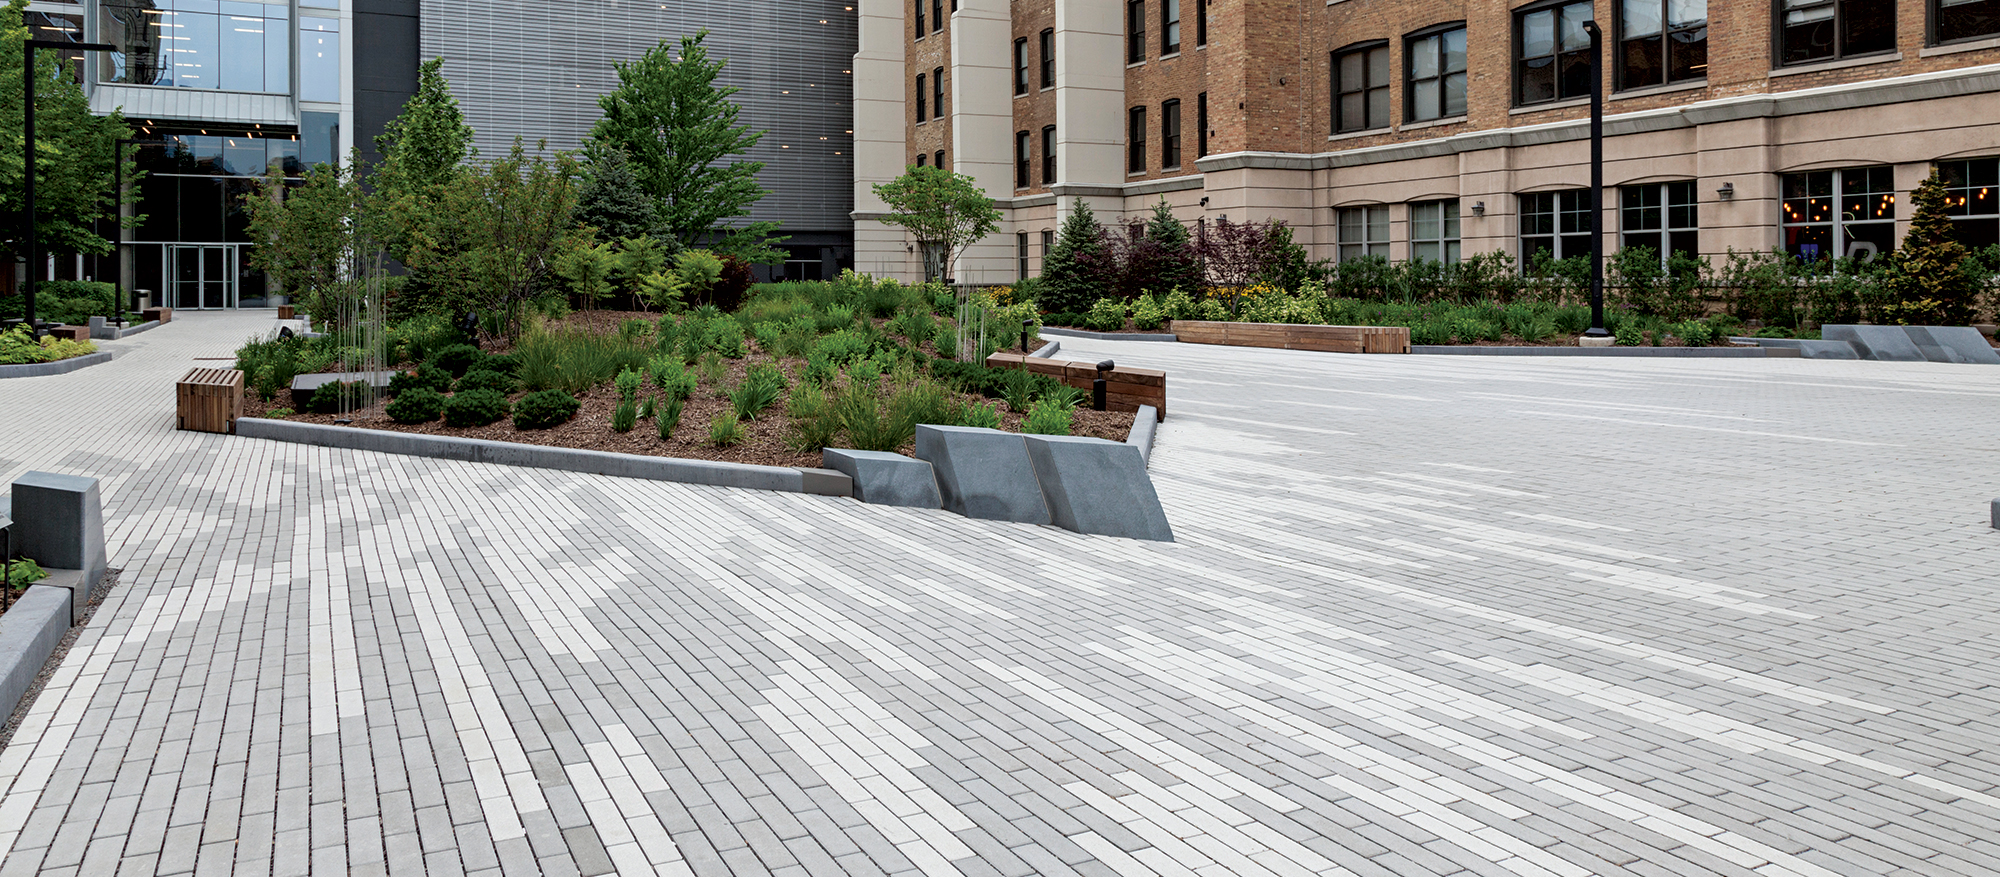 Flanked by garden beds is a sea of Eco-Promenade pavers, transitioning from white to grey as they part in two around a garden island.